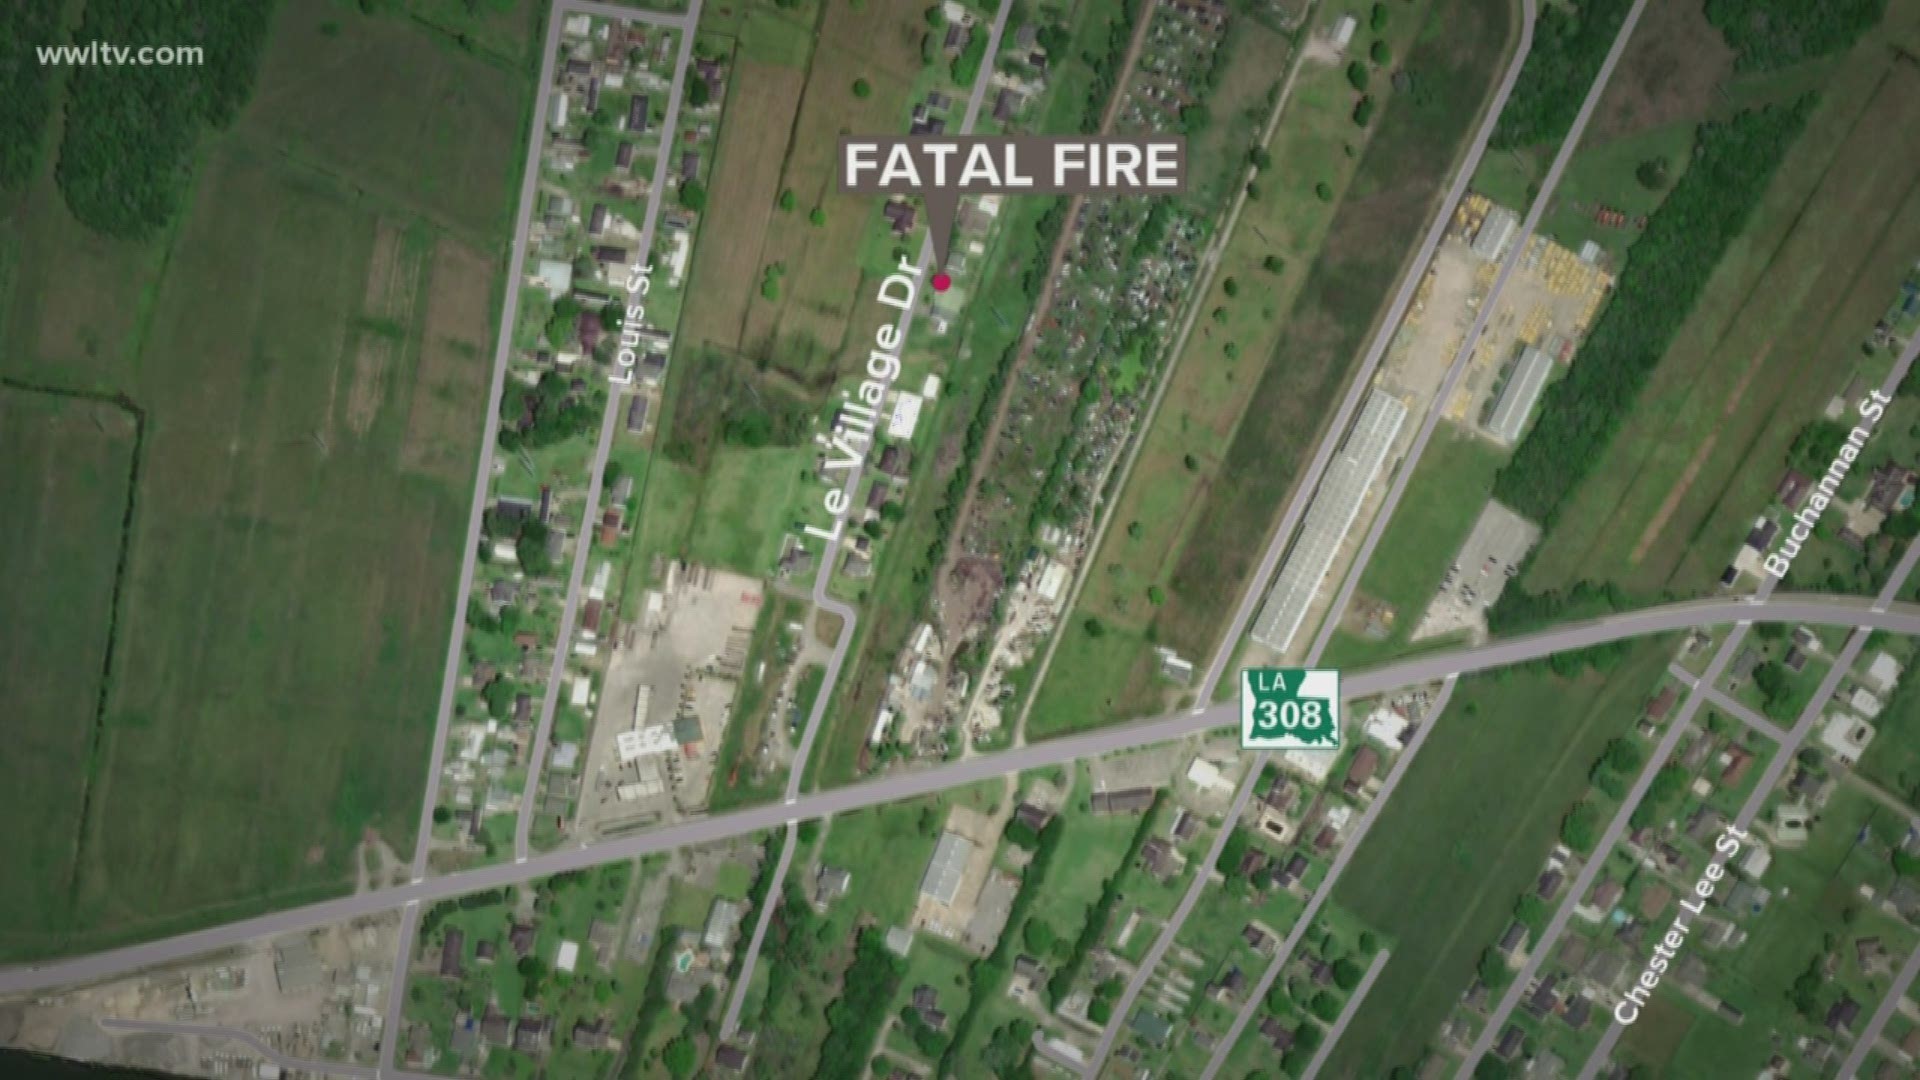 State fire officials say they're investigating after a volunteer firefighter and paramedic died early Monday morning inside his Lafourche Parish home.